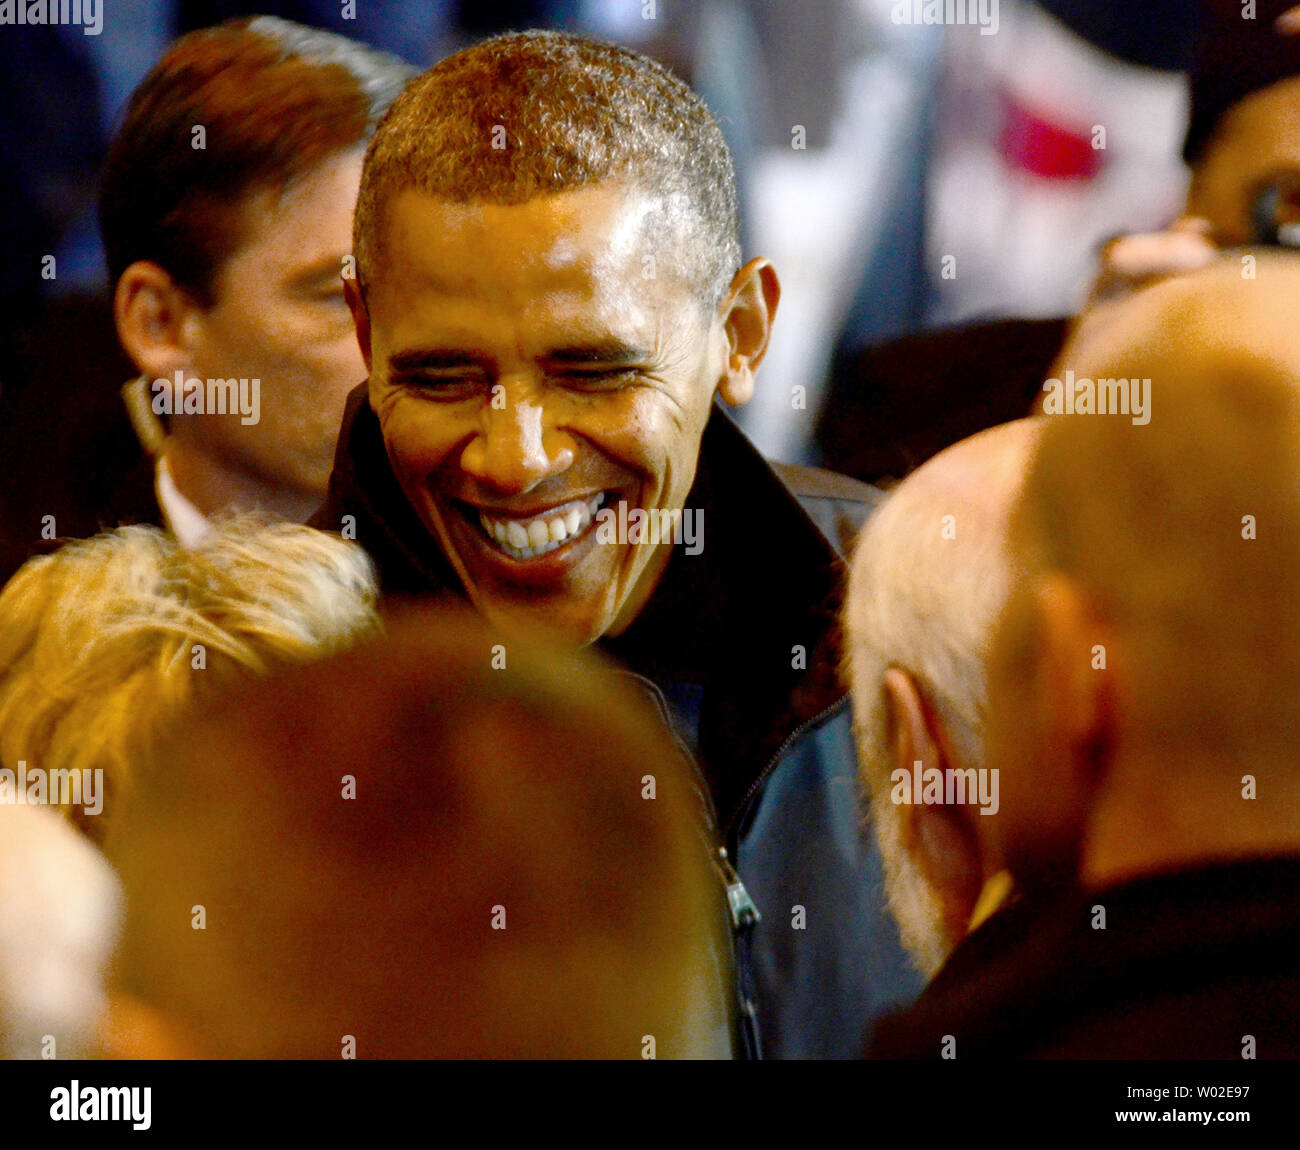 President Barack Obama greets workers and guests at the U. S. Steel Irvin Plant in West Mifflin, Pennsylvania after signing a presidential memorandum for MyIRA, a new retirement plan, on January 29, 2014.   UPI/Archie Carpenter Stock Photo